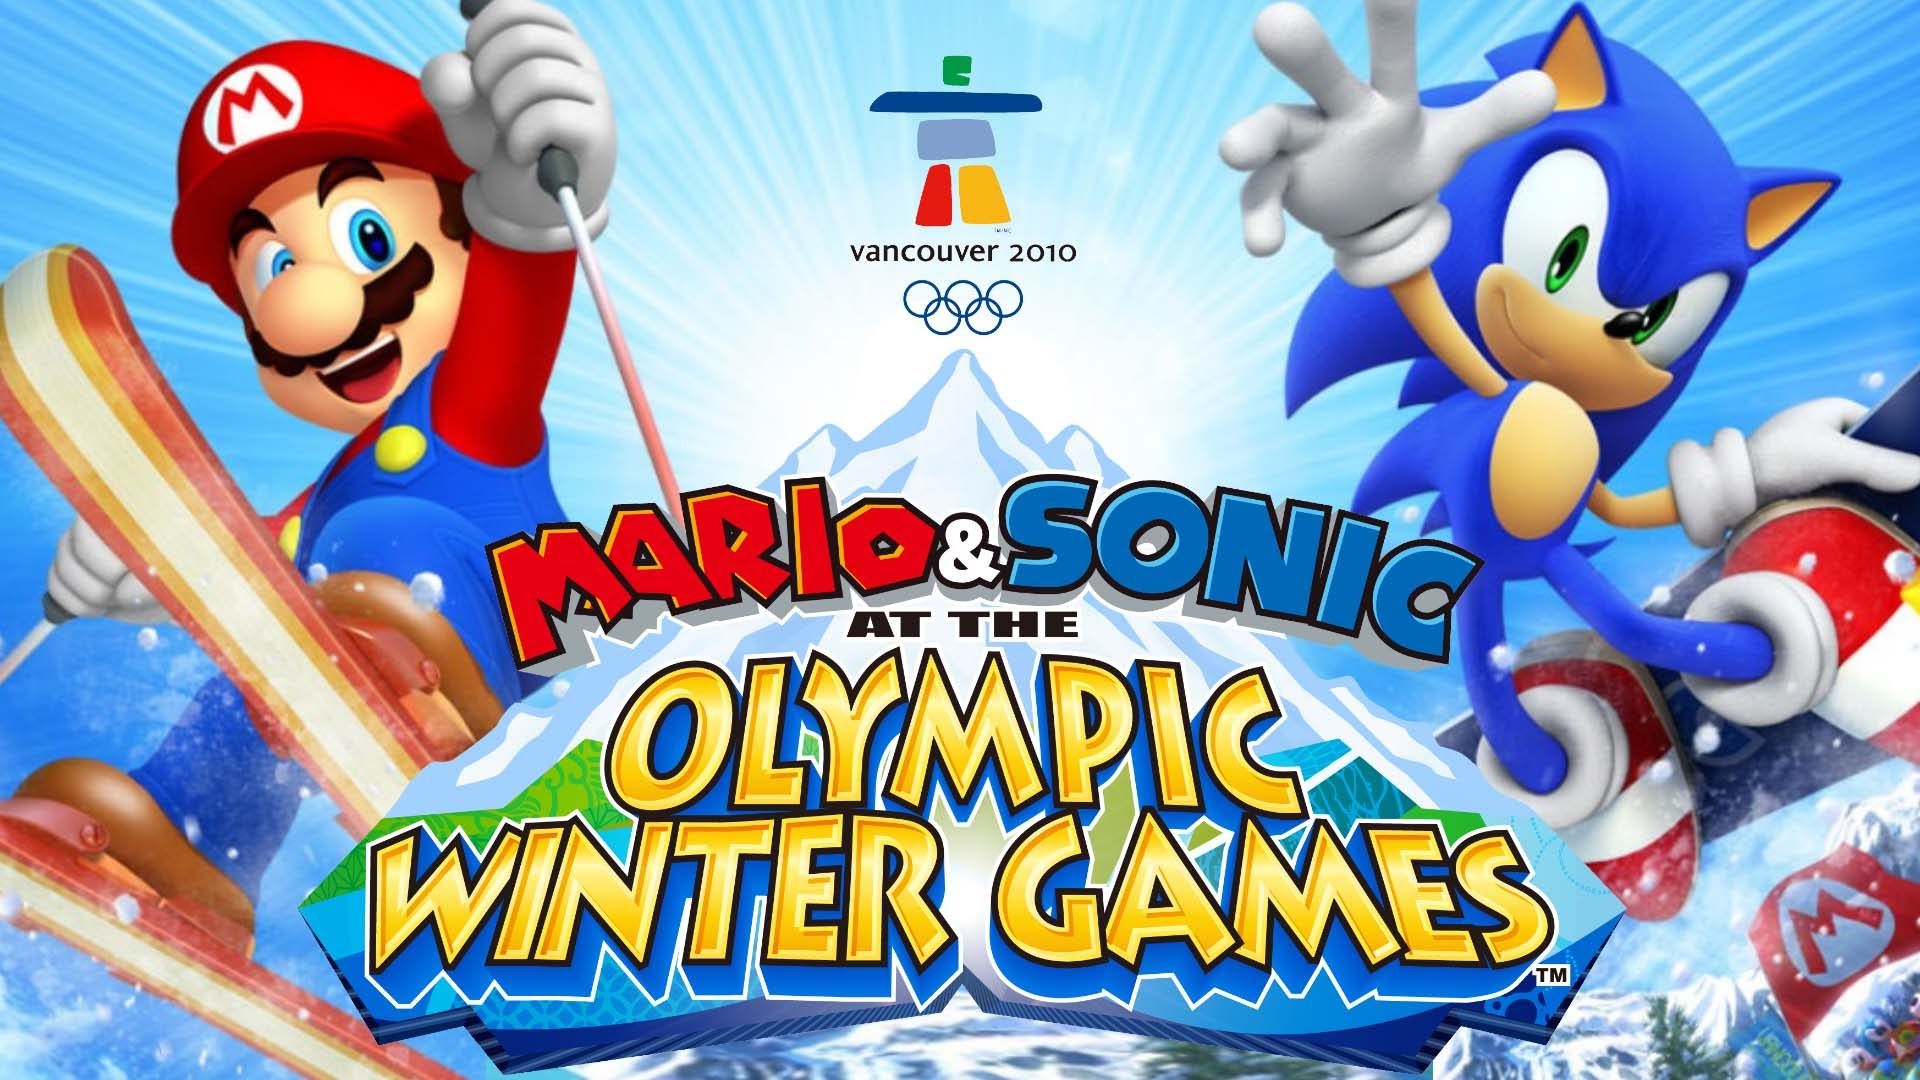 Mario & Sonic At The Olympic Winter Games wallpaper, Video Game